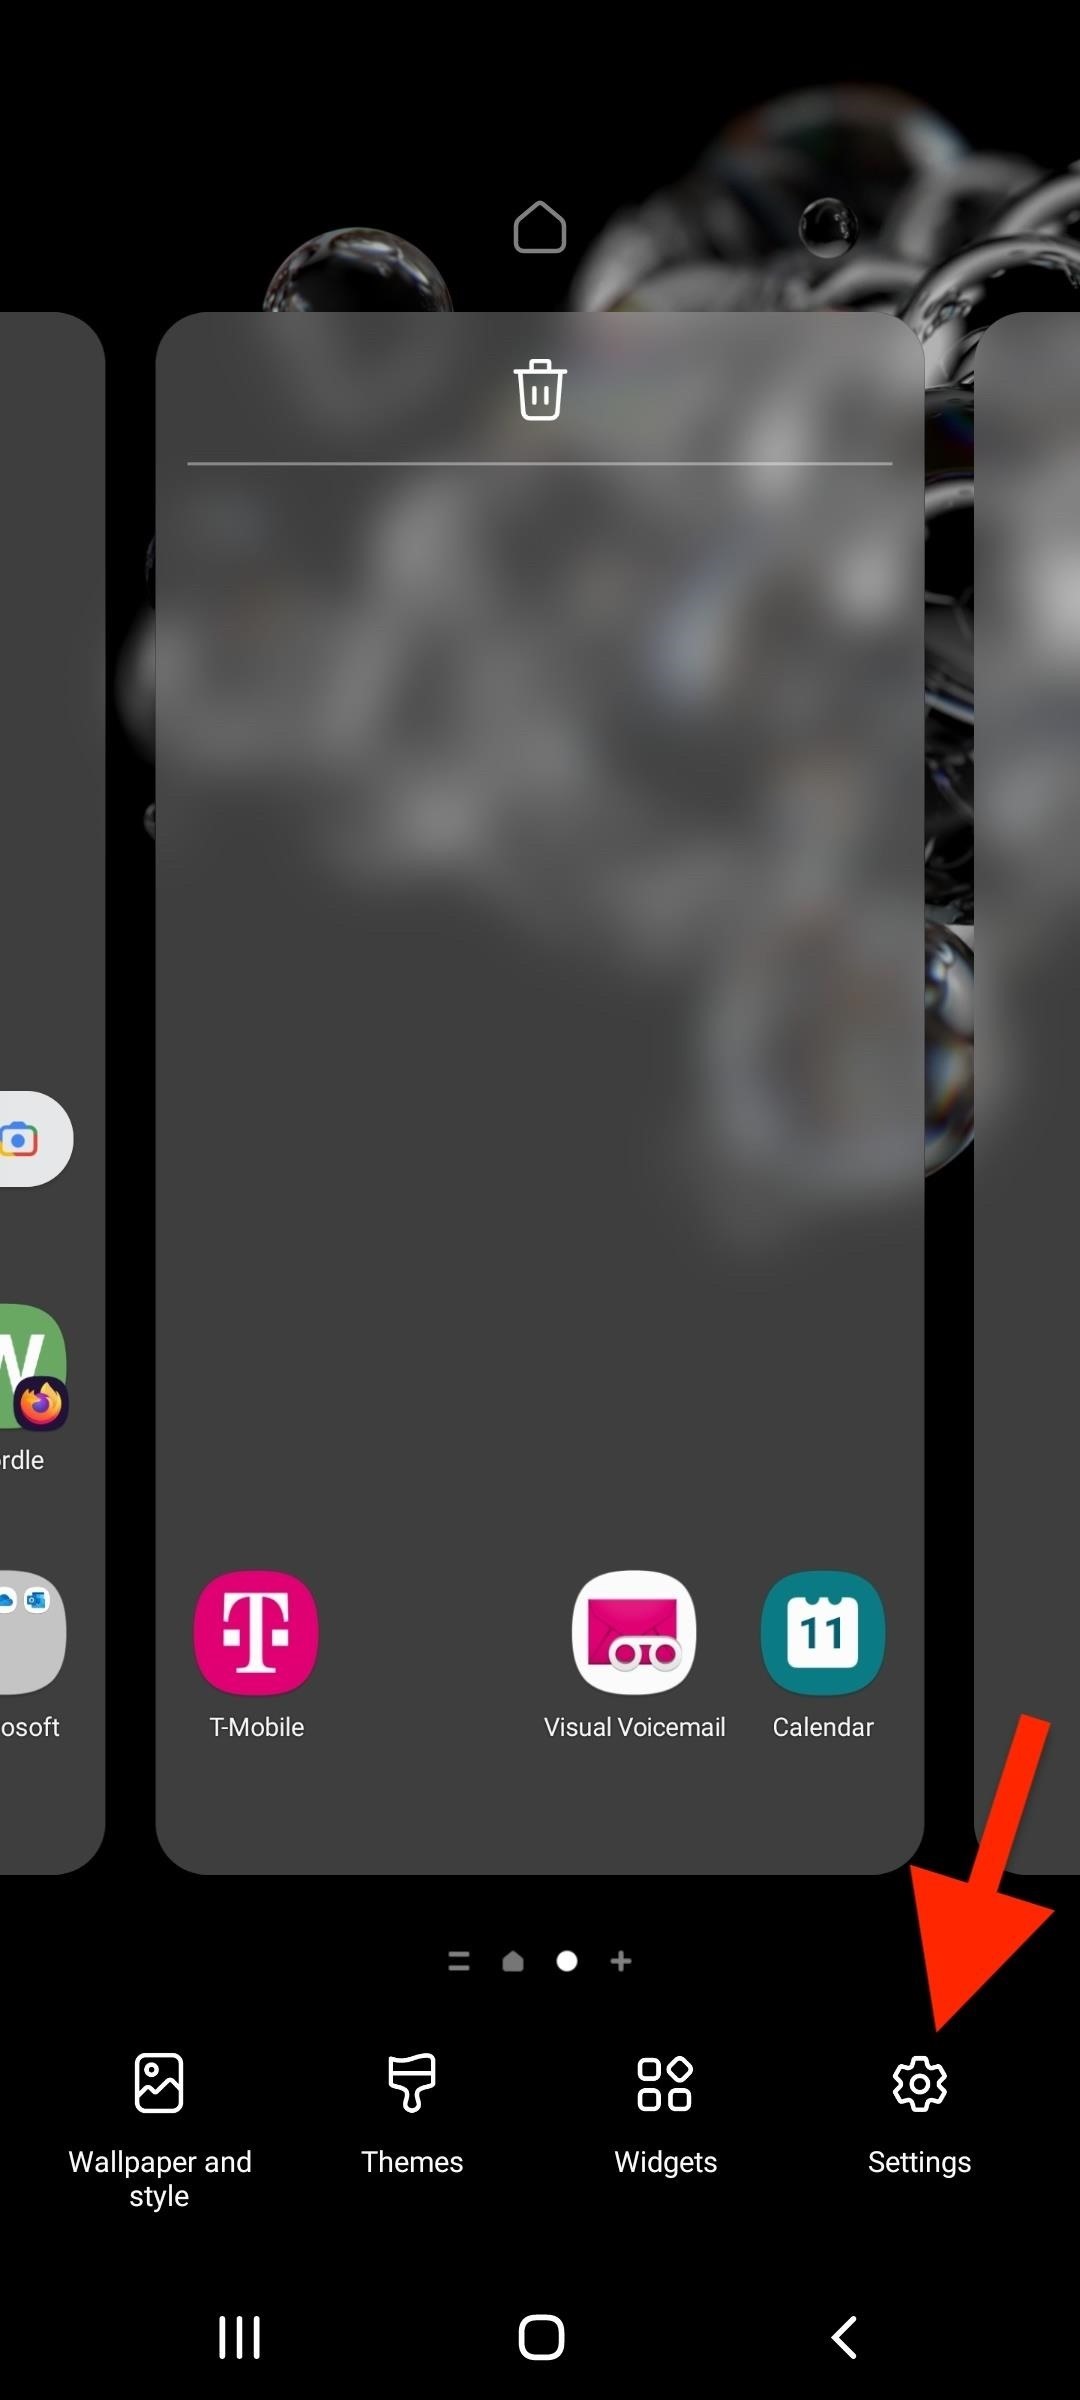 Hide Apps on Your Samsung Galaxy's Home Screen, App Tray, and Search